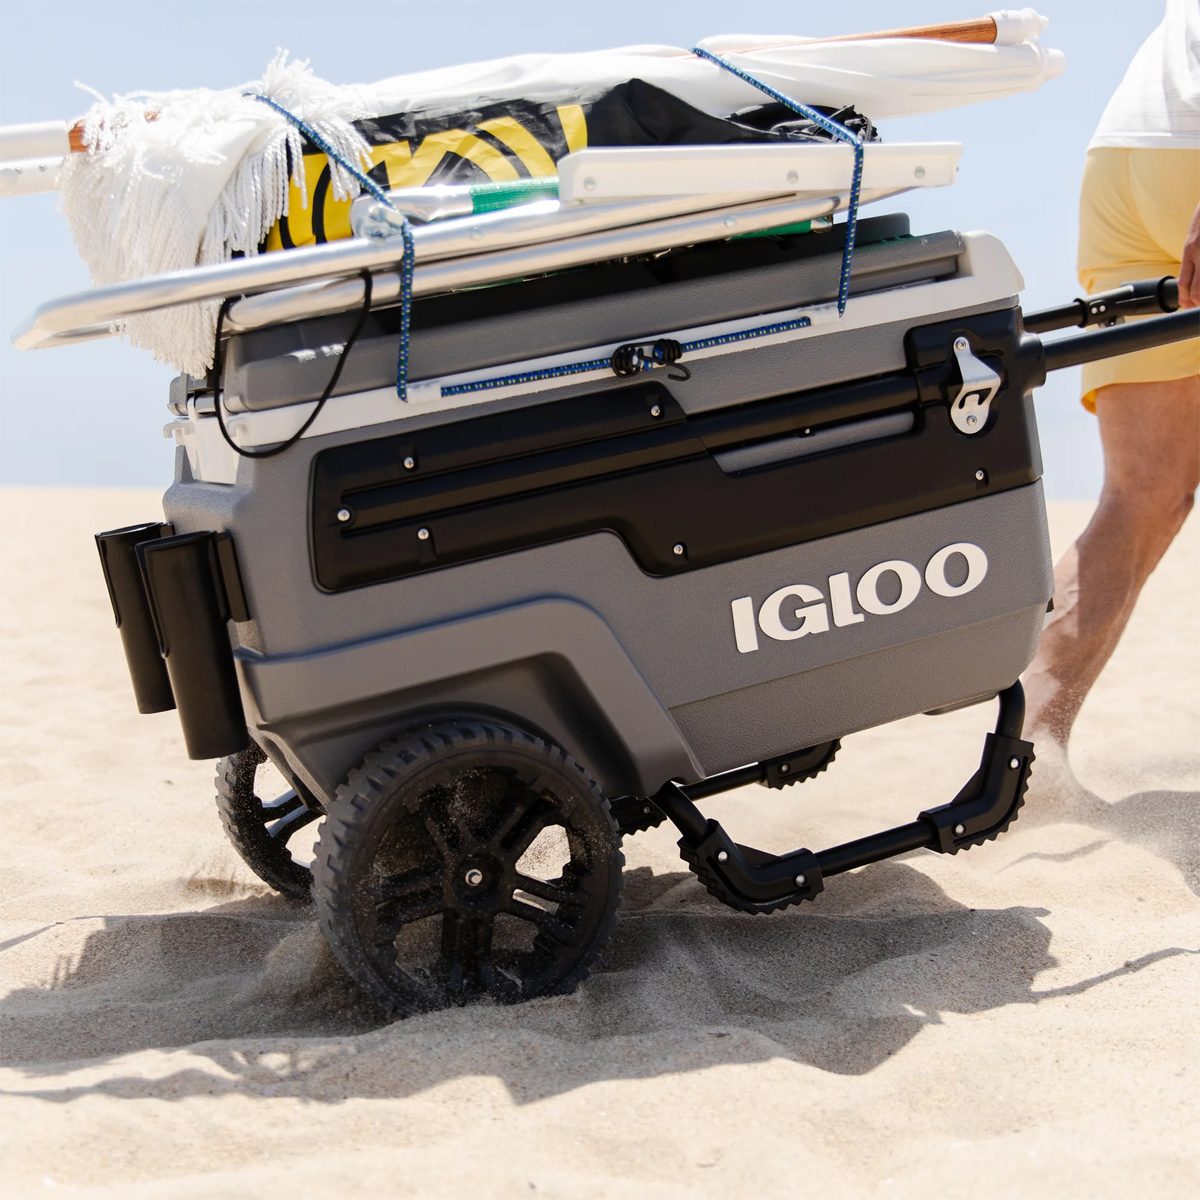 The Igloo Trailmate Cooler Review: Is It Worth The Hype?